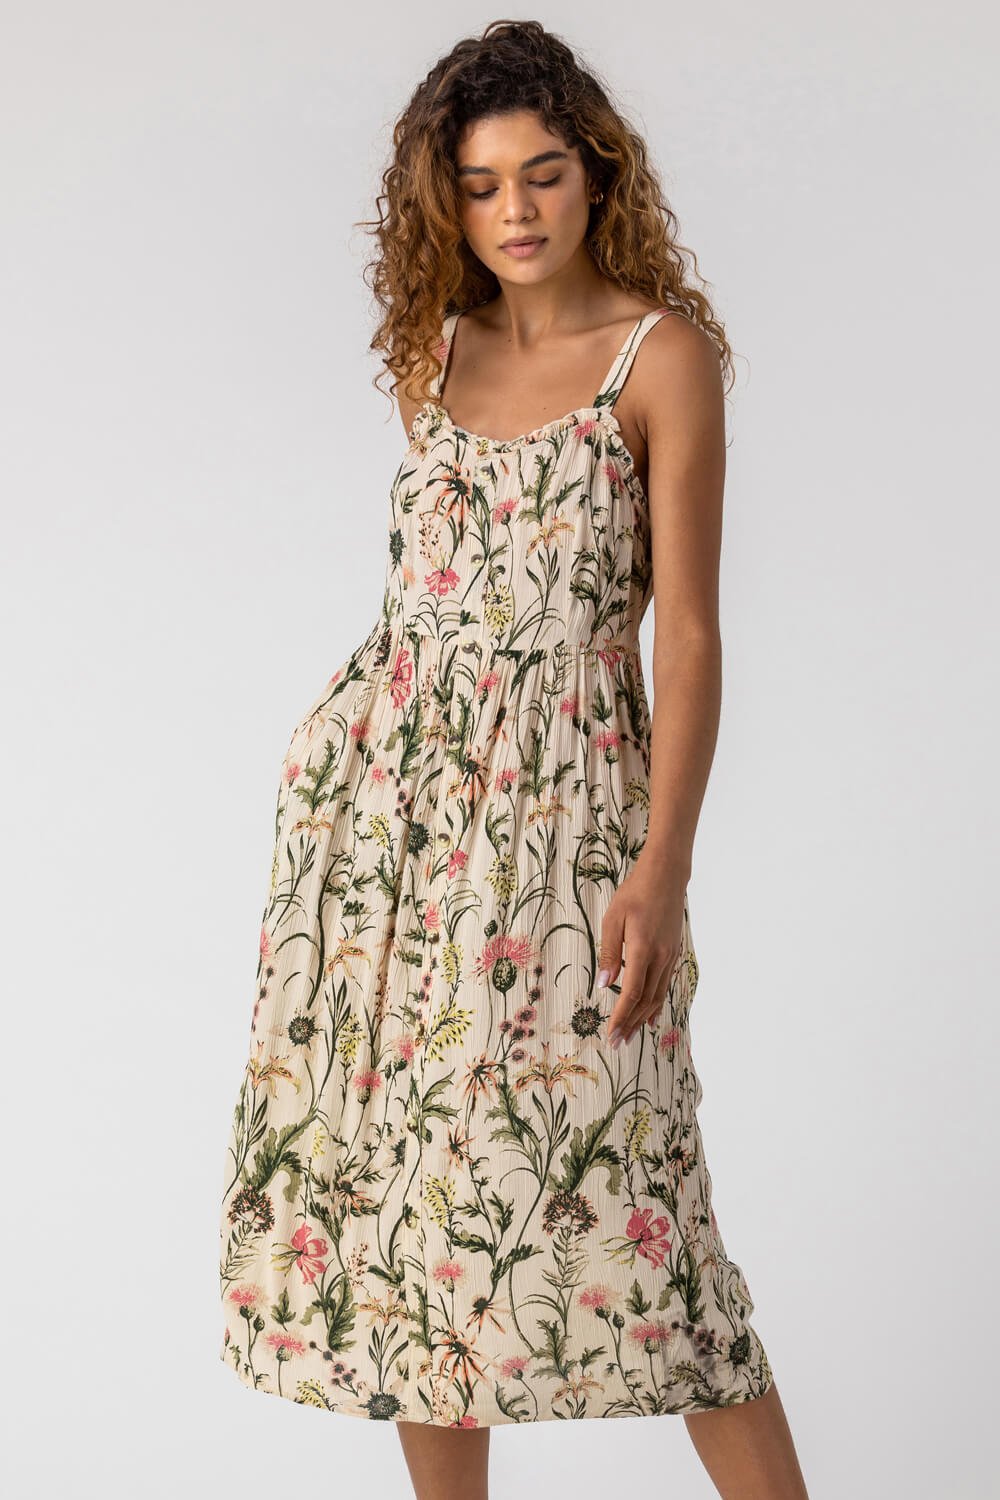 Ivory  Floral Print Button Down Sun Dress, Image 1 of 5